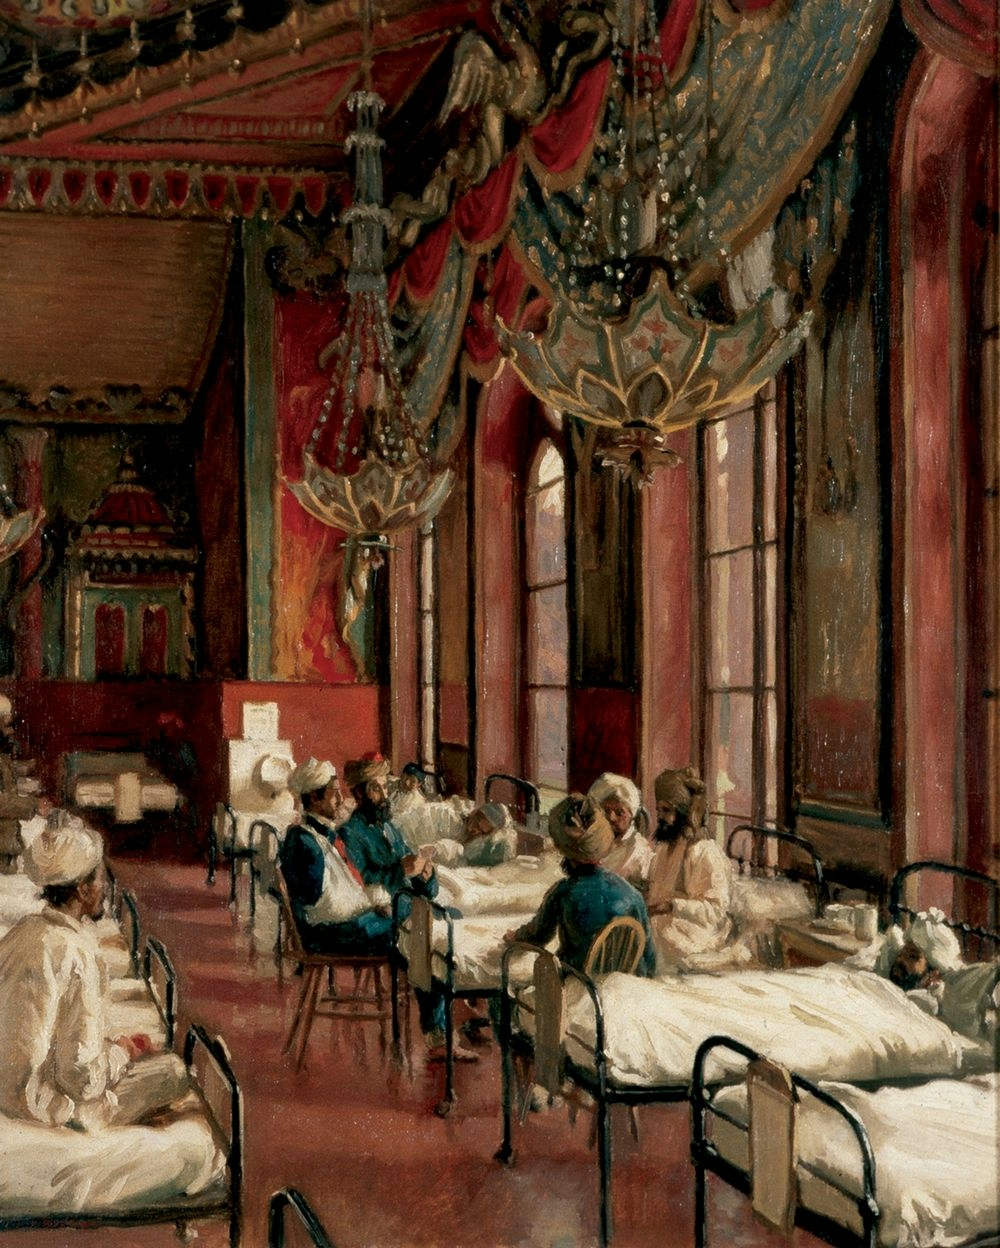 Two rows of beds, occupied by patients, in a highly decorative pink room. A group of patients in chairs are clustered around one of the beds.